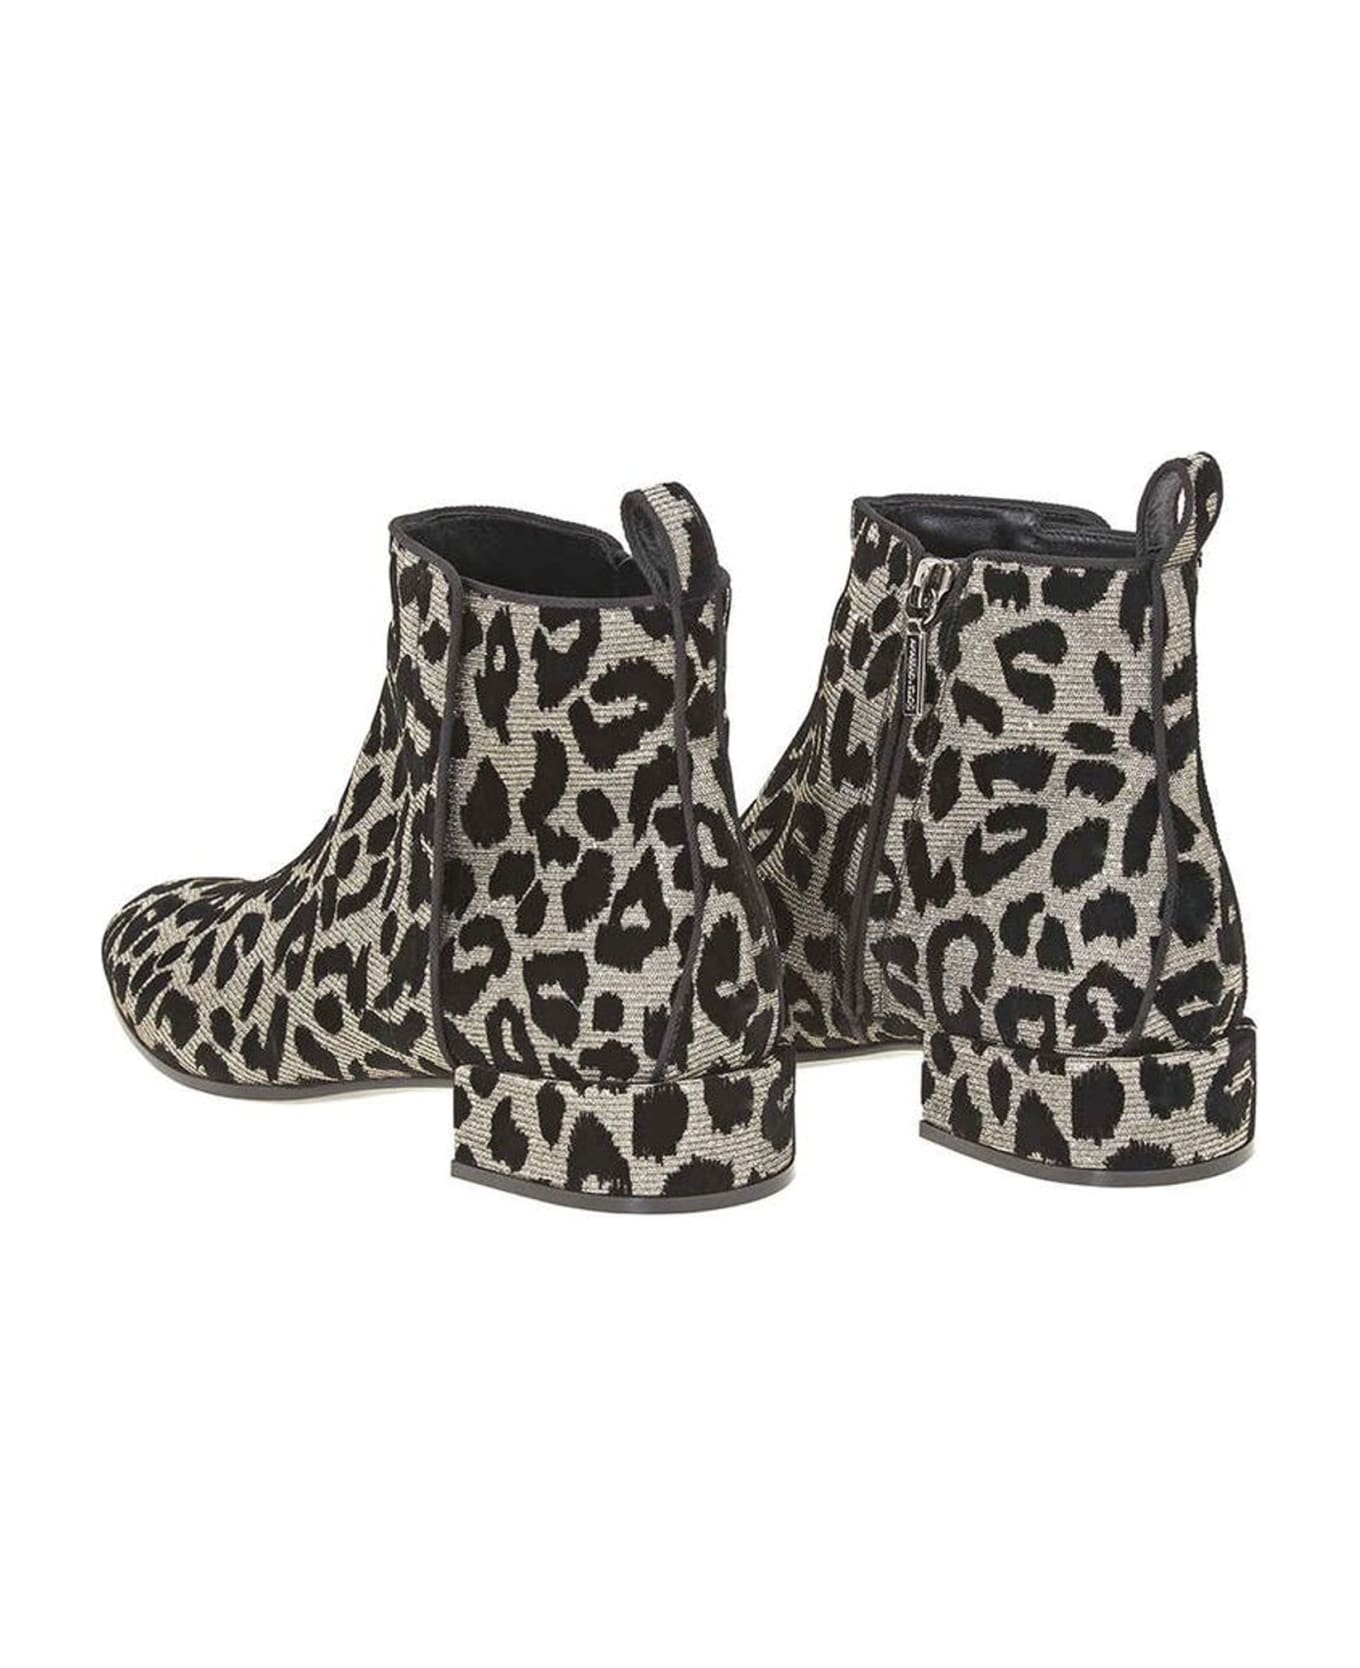 Dolce & Gabbana Leopard Ankle Boots - Silver ブーツ